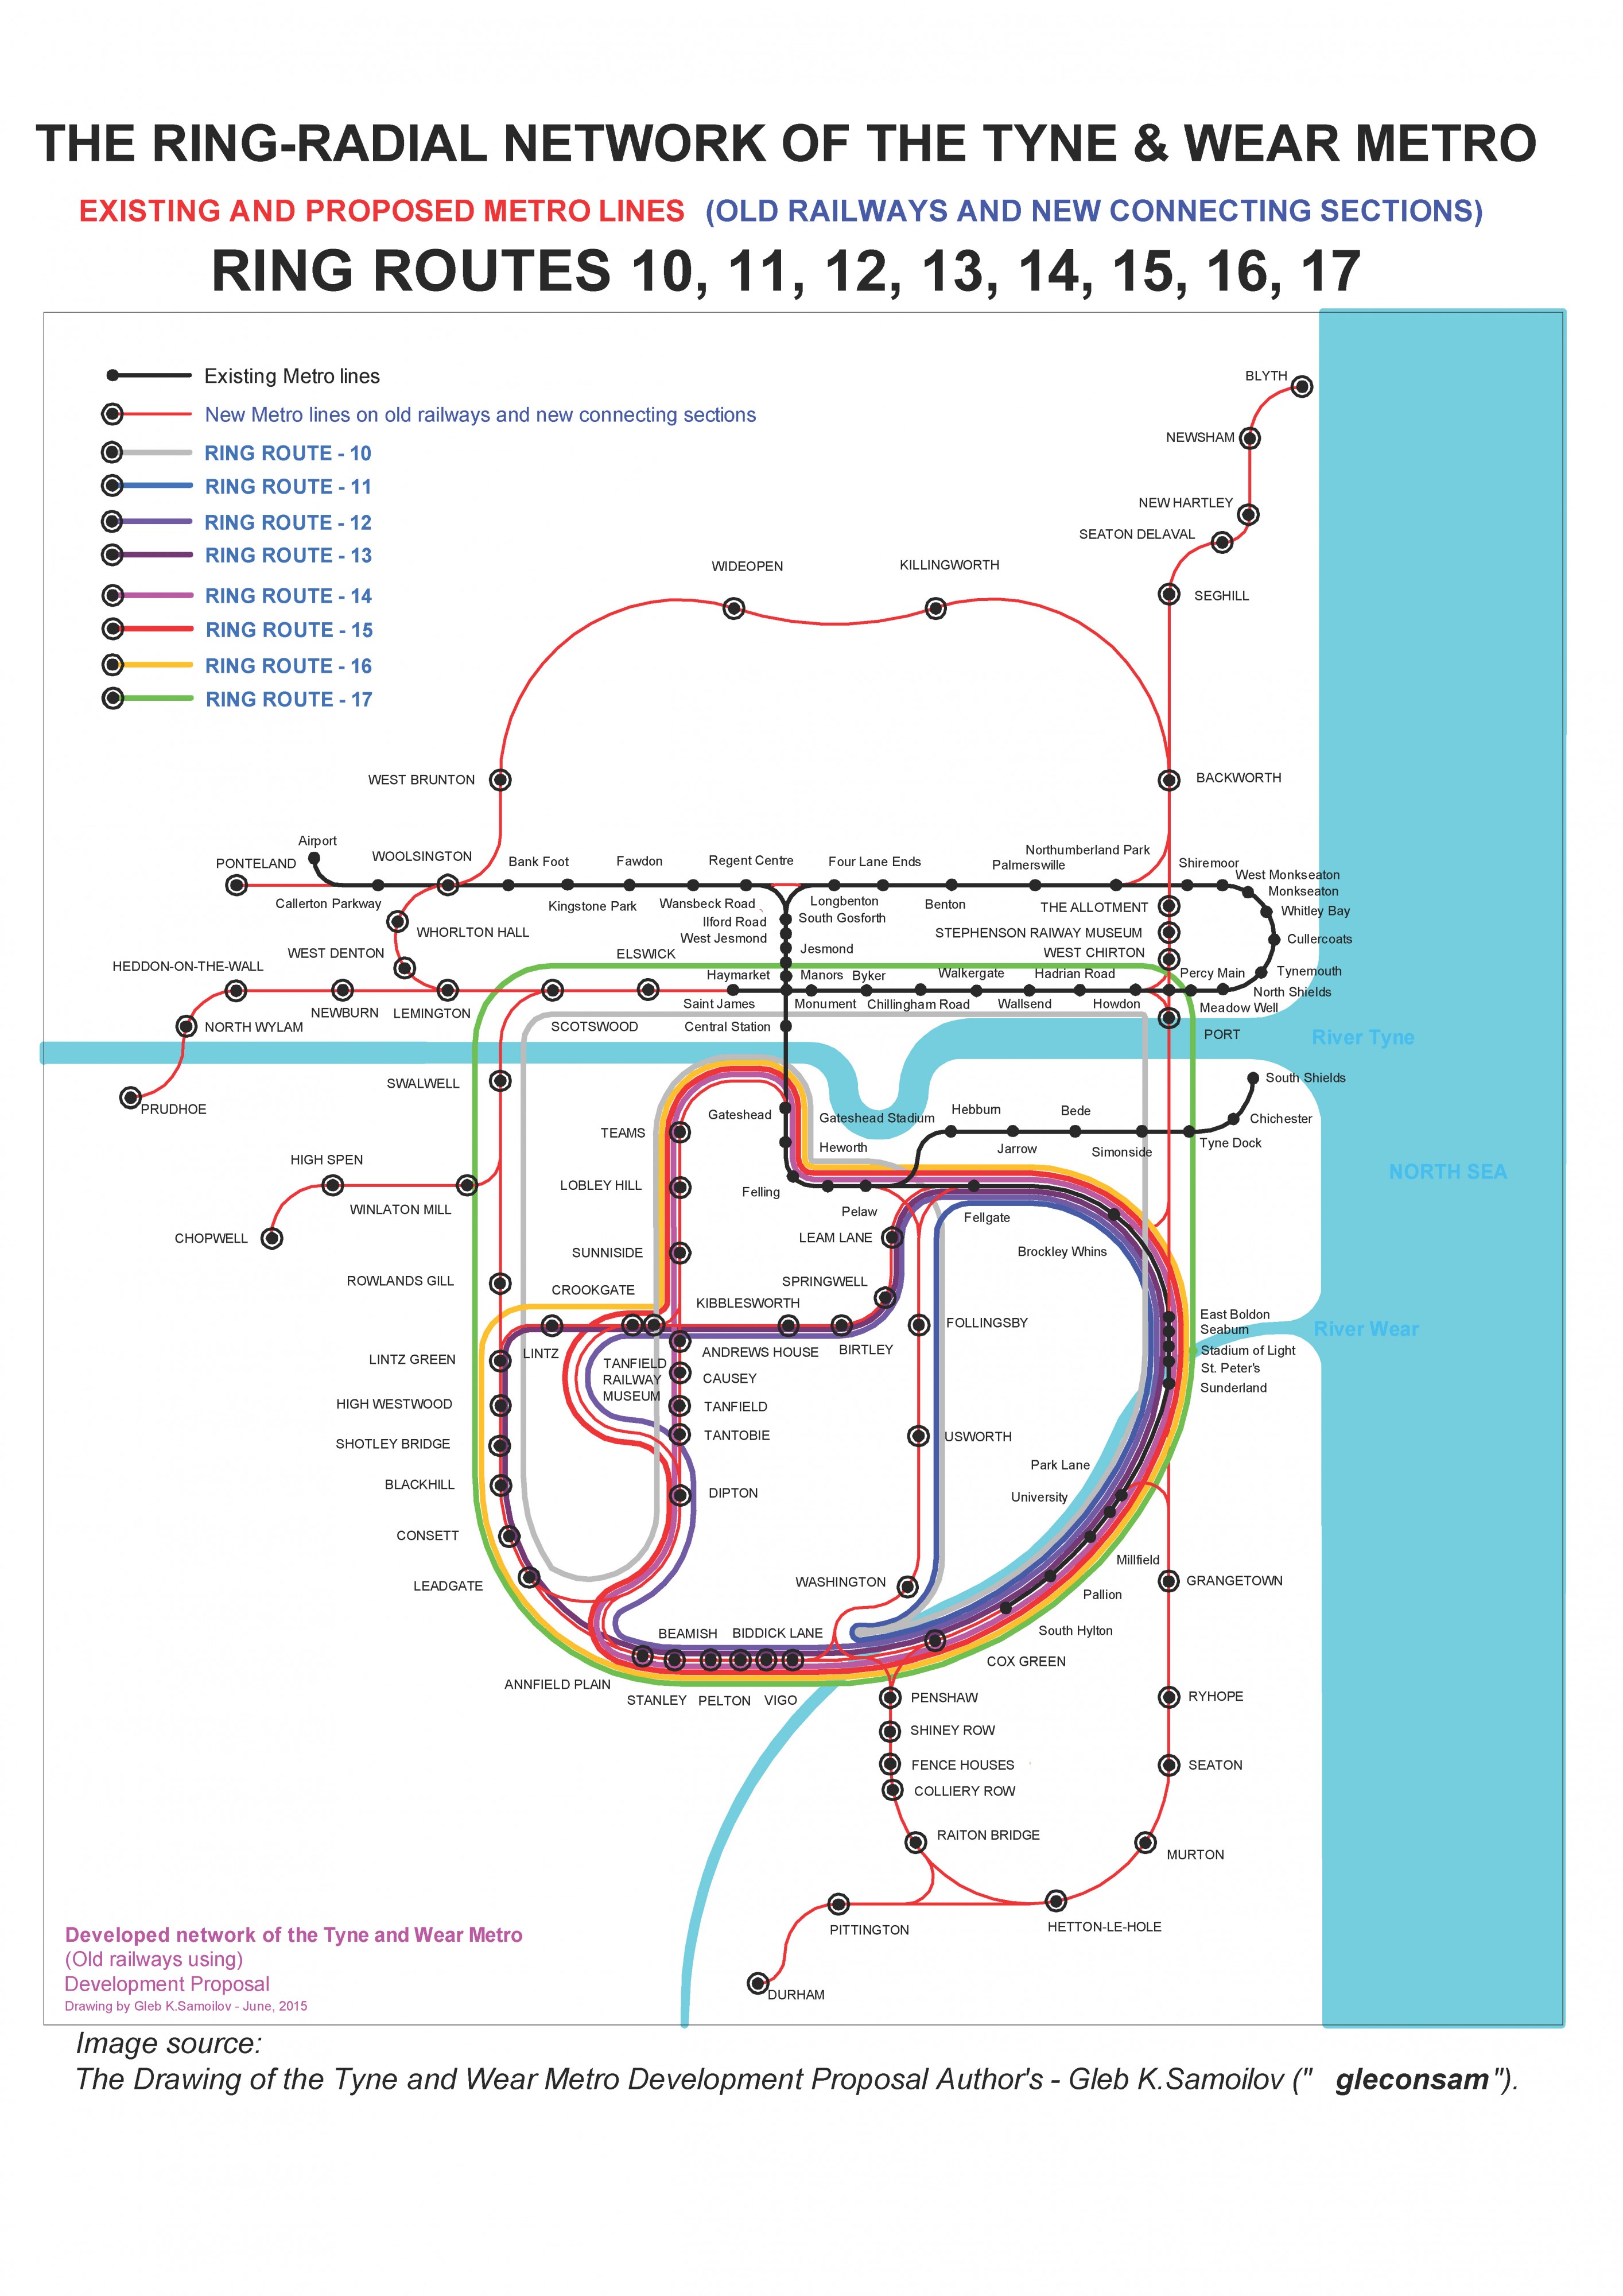 the Ring-Radial network of the Tyne and Wear Metro – ring routes 10 - 17